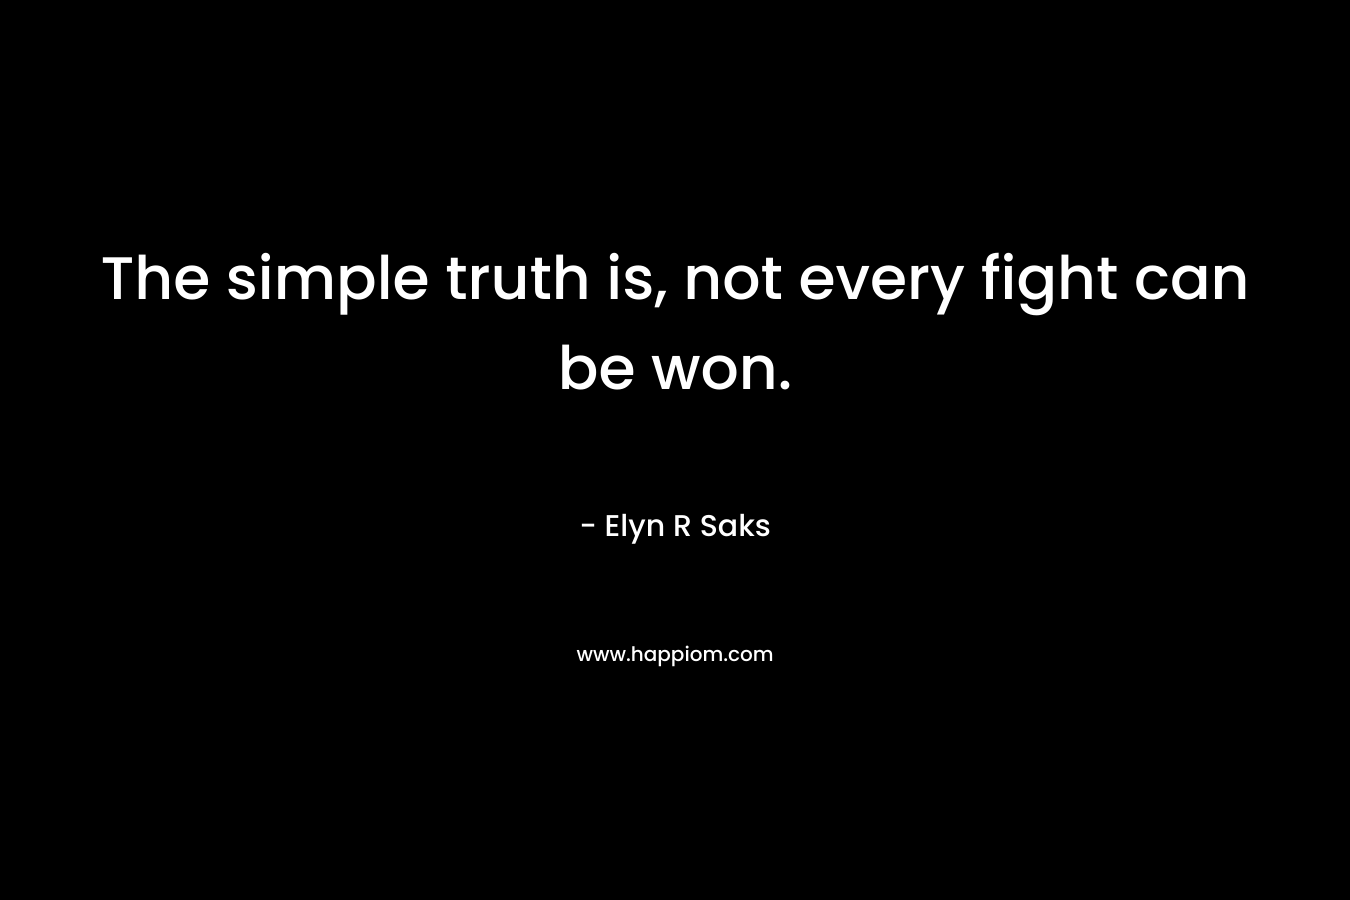 The simple truth is, not every fight can be won. – Elyn R Saks